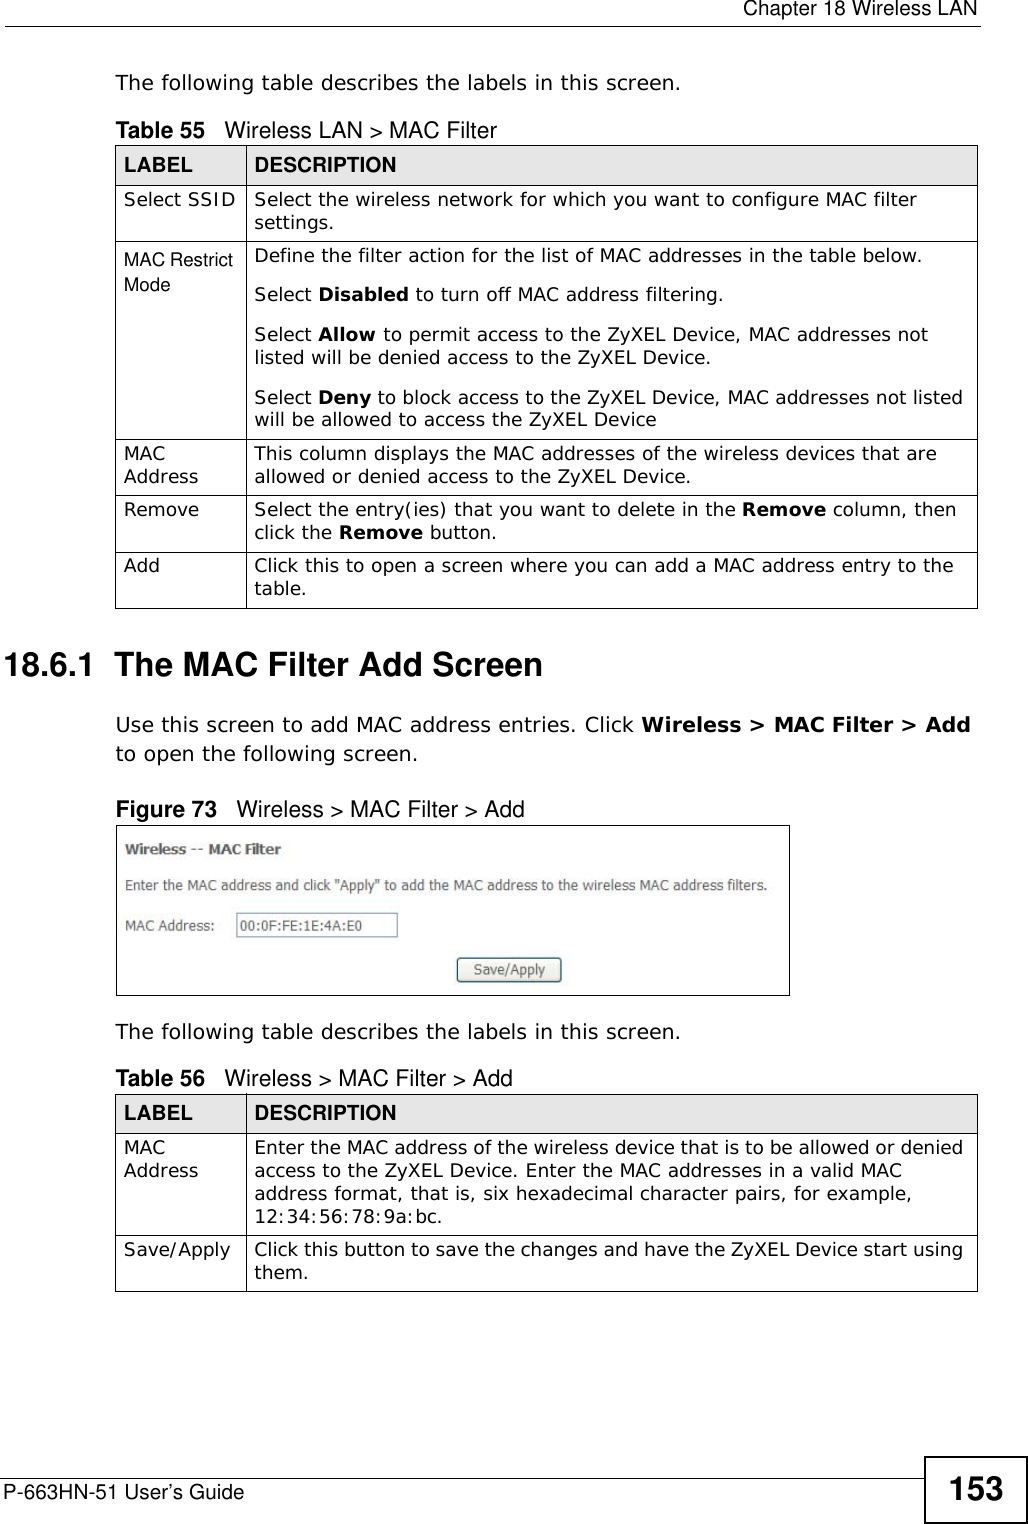  Chapter 18 Wireless LANP-663HN-51 User’s Guide 153The following table describes the labels in this screen.18.6.1  The MAC Filter Add Screen     Use this screen to add MAC address entries. Click Wireless &gt; MAC Filter &gt; Add to open the following screen.Figure 73   Wireless &gt; MAC Filter &gt; AddThe following table describes the labels in this screen.Table 55   Wireless LAN &gt; MAC FilterLABEL DESCRIPTIONSelect SSID Select the wireless network for which you want to configure MAC filter settings. MAC Restrict Mode Define the filter action for the list of MAC addresses in the table below. Select Disabled to turn off MAC address filtering.Select Allow to permit access to the ZyXEL Device, MAC addresses not listed will be denied access to the ZyXEL Device. Select Deny to block access to the ZyXEL Device, MAC addresses not listed will be allowed to access the ZyXEL Device MAC Address This column displays the MAC addresses of the wireless devices that are allowed or denied access to the ZyXEL Device.Remove Select the entry(ies) that you want to delete in the Remove column, then click the Remove button.Add Click this to open a screen where you can add a MAC address entry to the table. Table 56   Wireless &gt; MAC Filter &gt; AddLABEL DESCRIPTIONMAC Address Enter the MAC address of the wireless device that is to be allowed or denied access to the ZyXEL Device. Enter the MAC addresses in a valid MAC address format, that is, six hexadecimal character pairs, for example, 12:34:56:78:9a:bc.Save/Apply Click this button to save the changes and have the ZyXEL Device start using them.